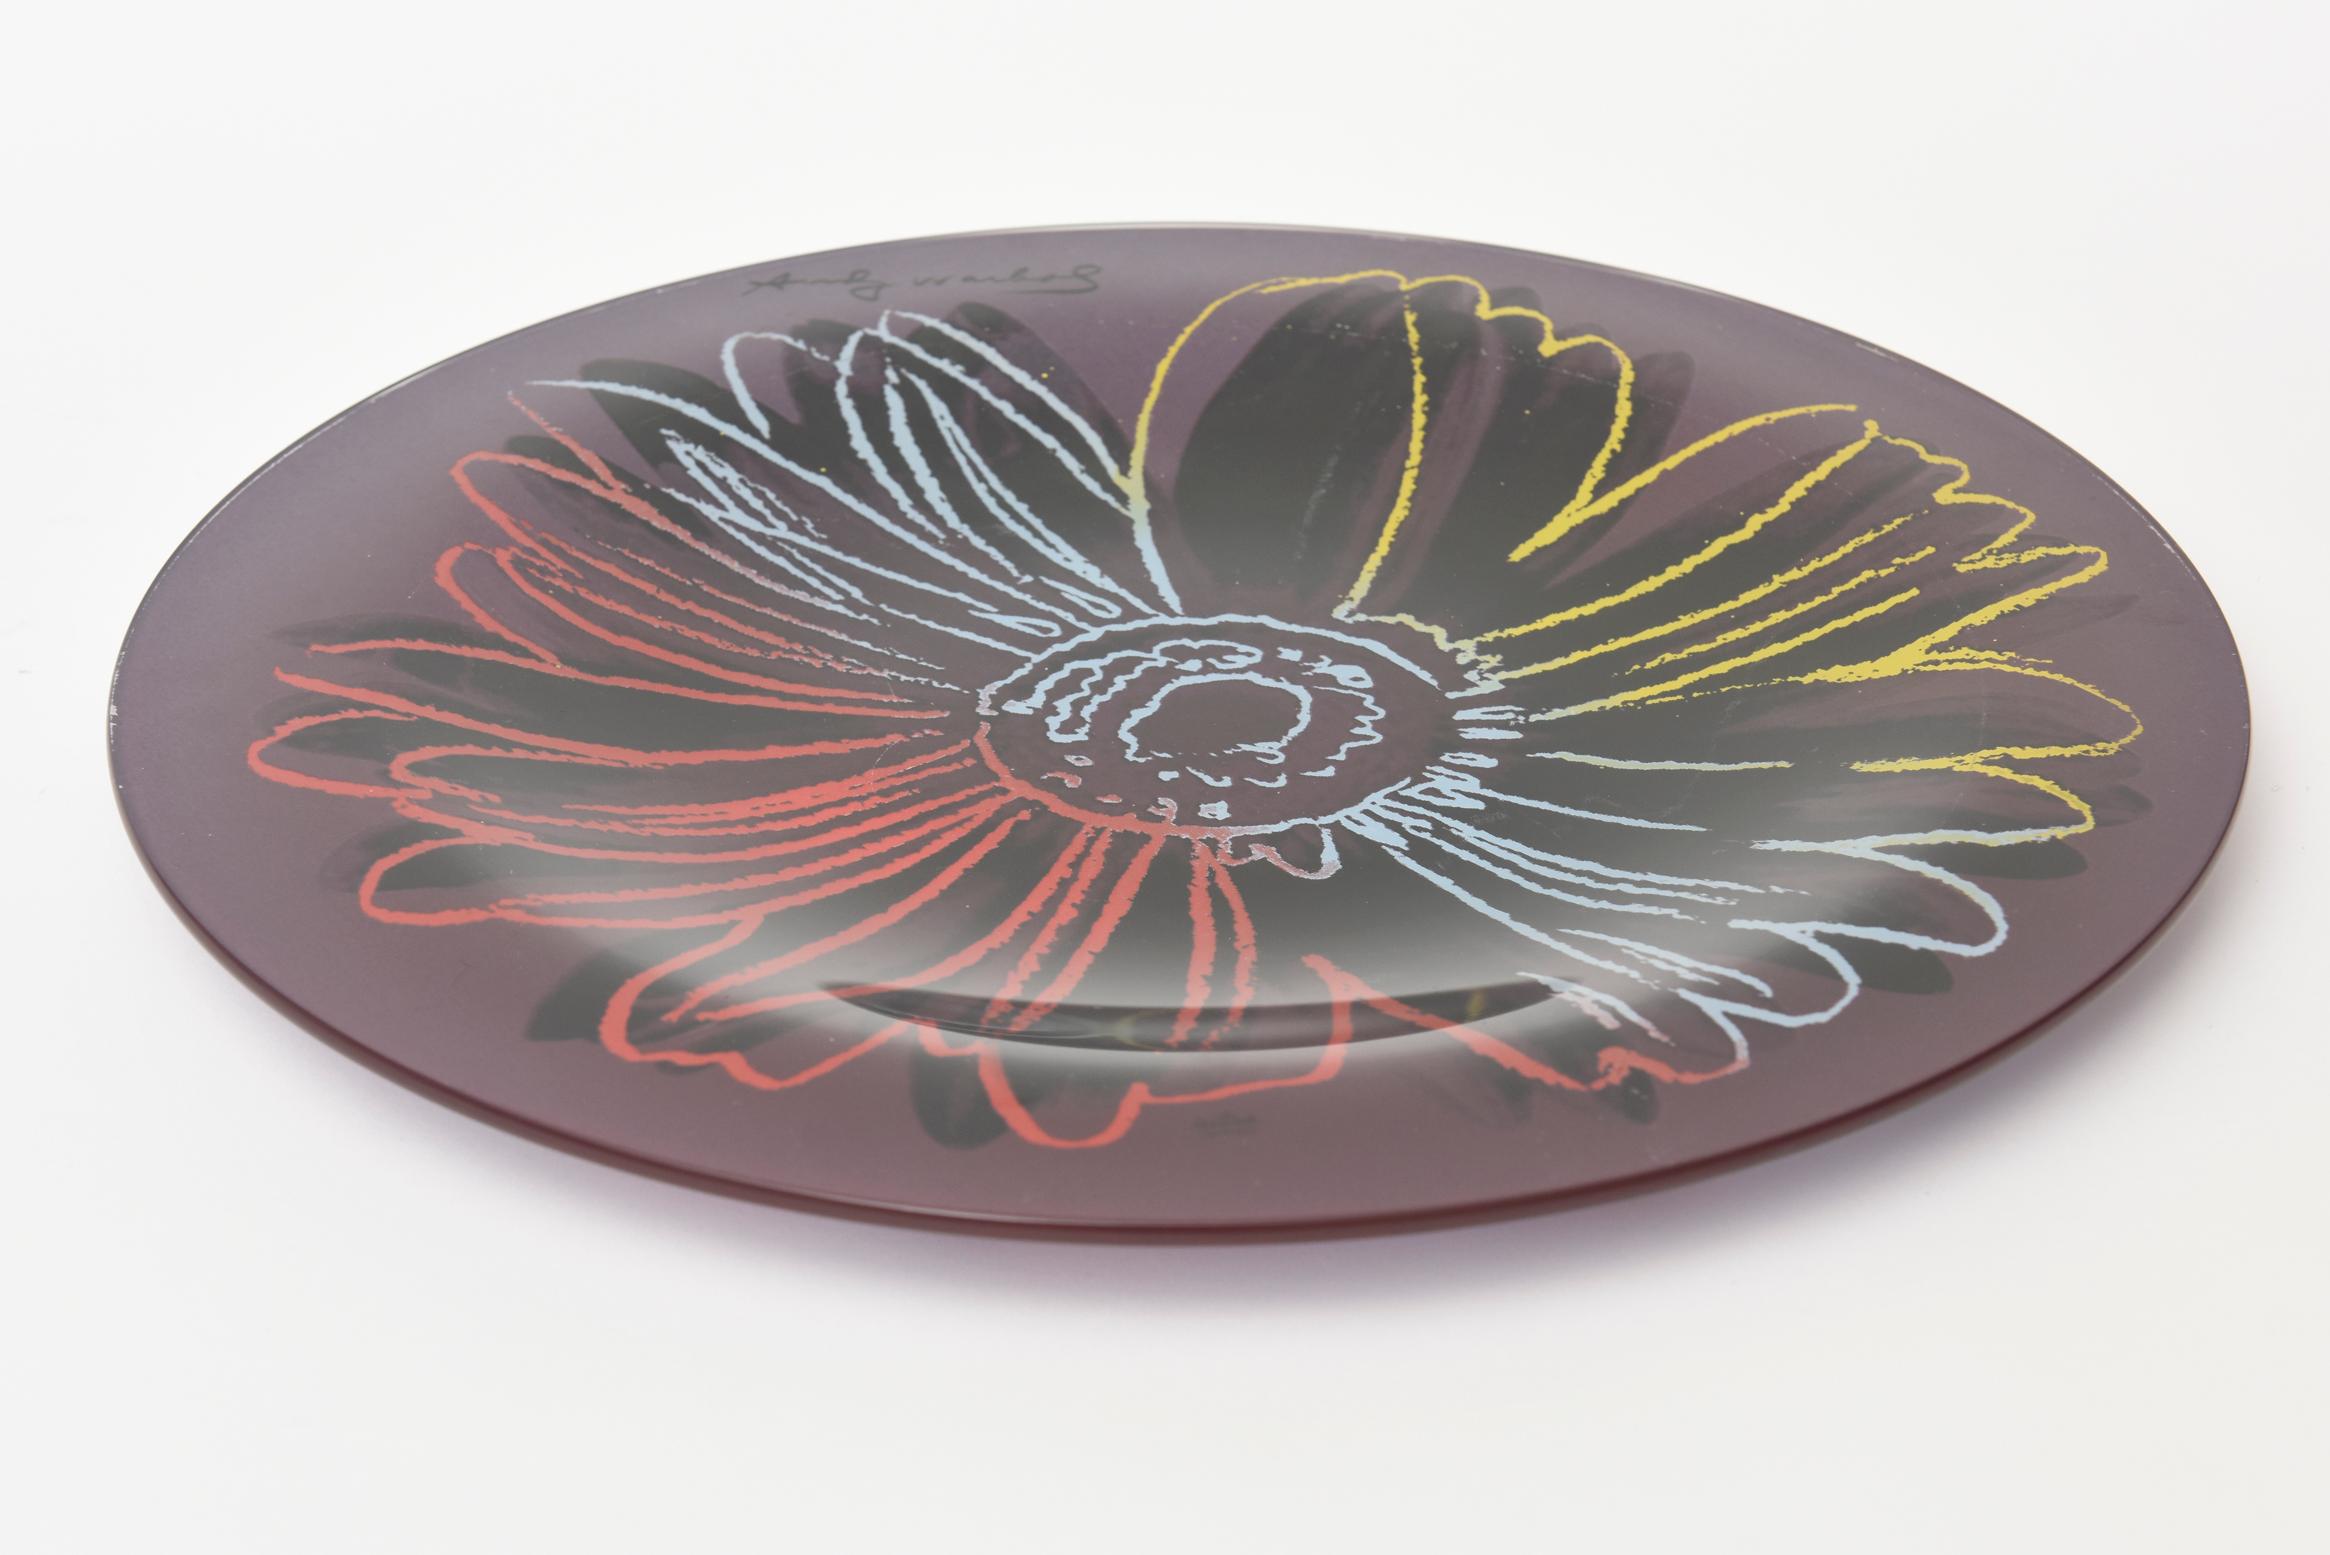 This iconic blown glass flower plate designed after Andy Warhol and produced by Rosenthal is from the 1980s. It came in a few different color waves. This is the last one we have remaining. It can be used for serving or just as decor. Tres chic! It